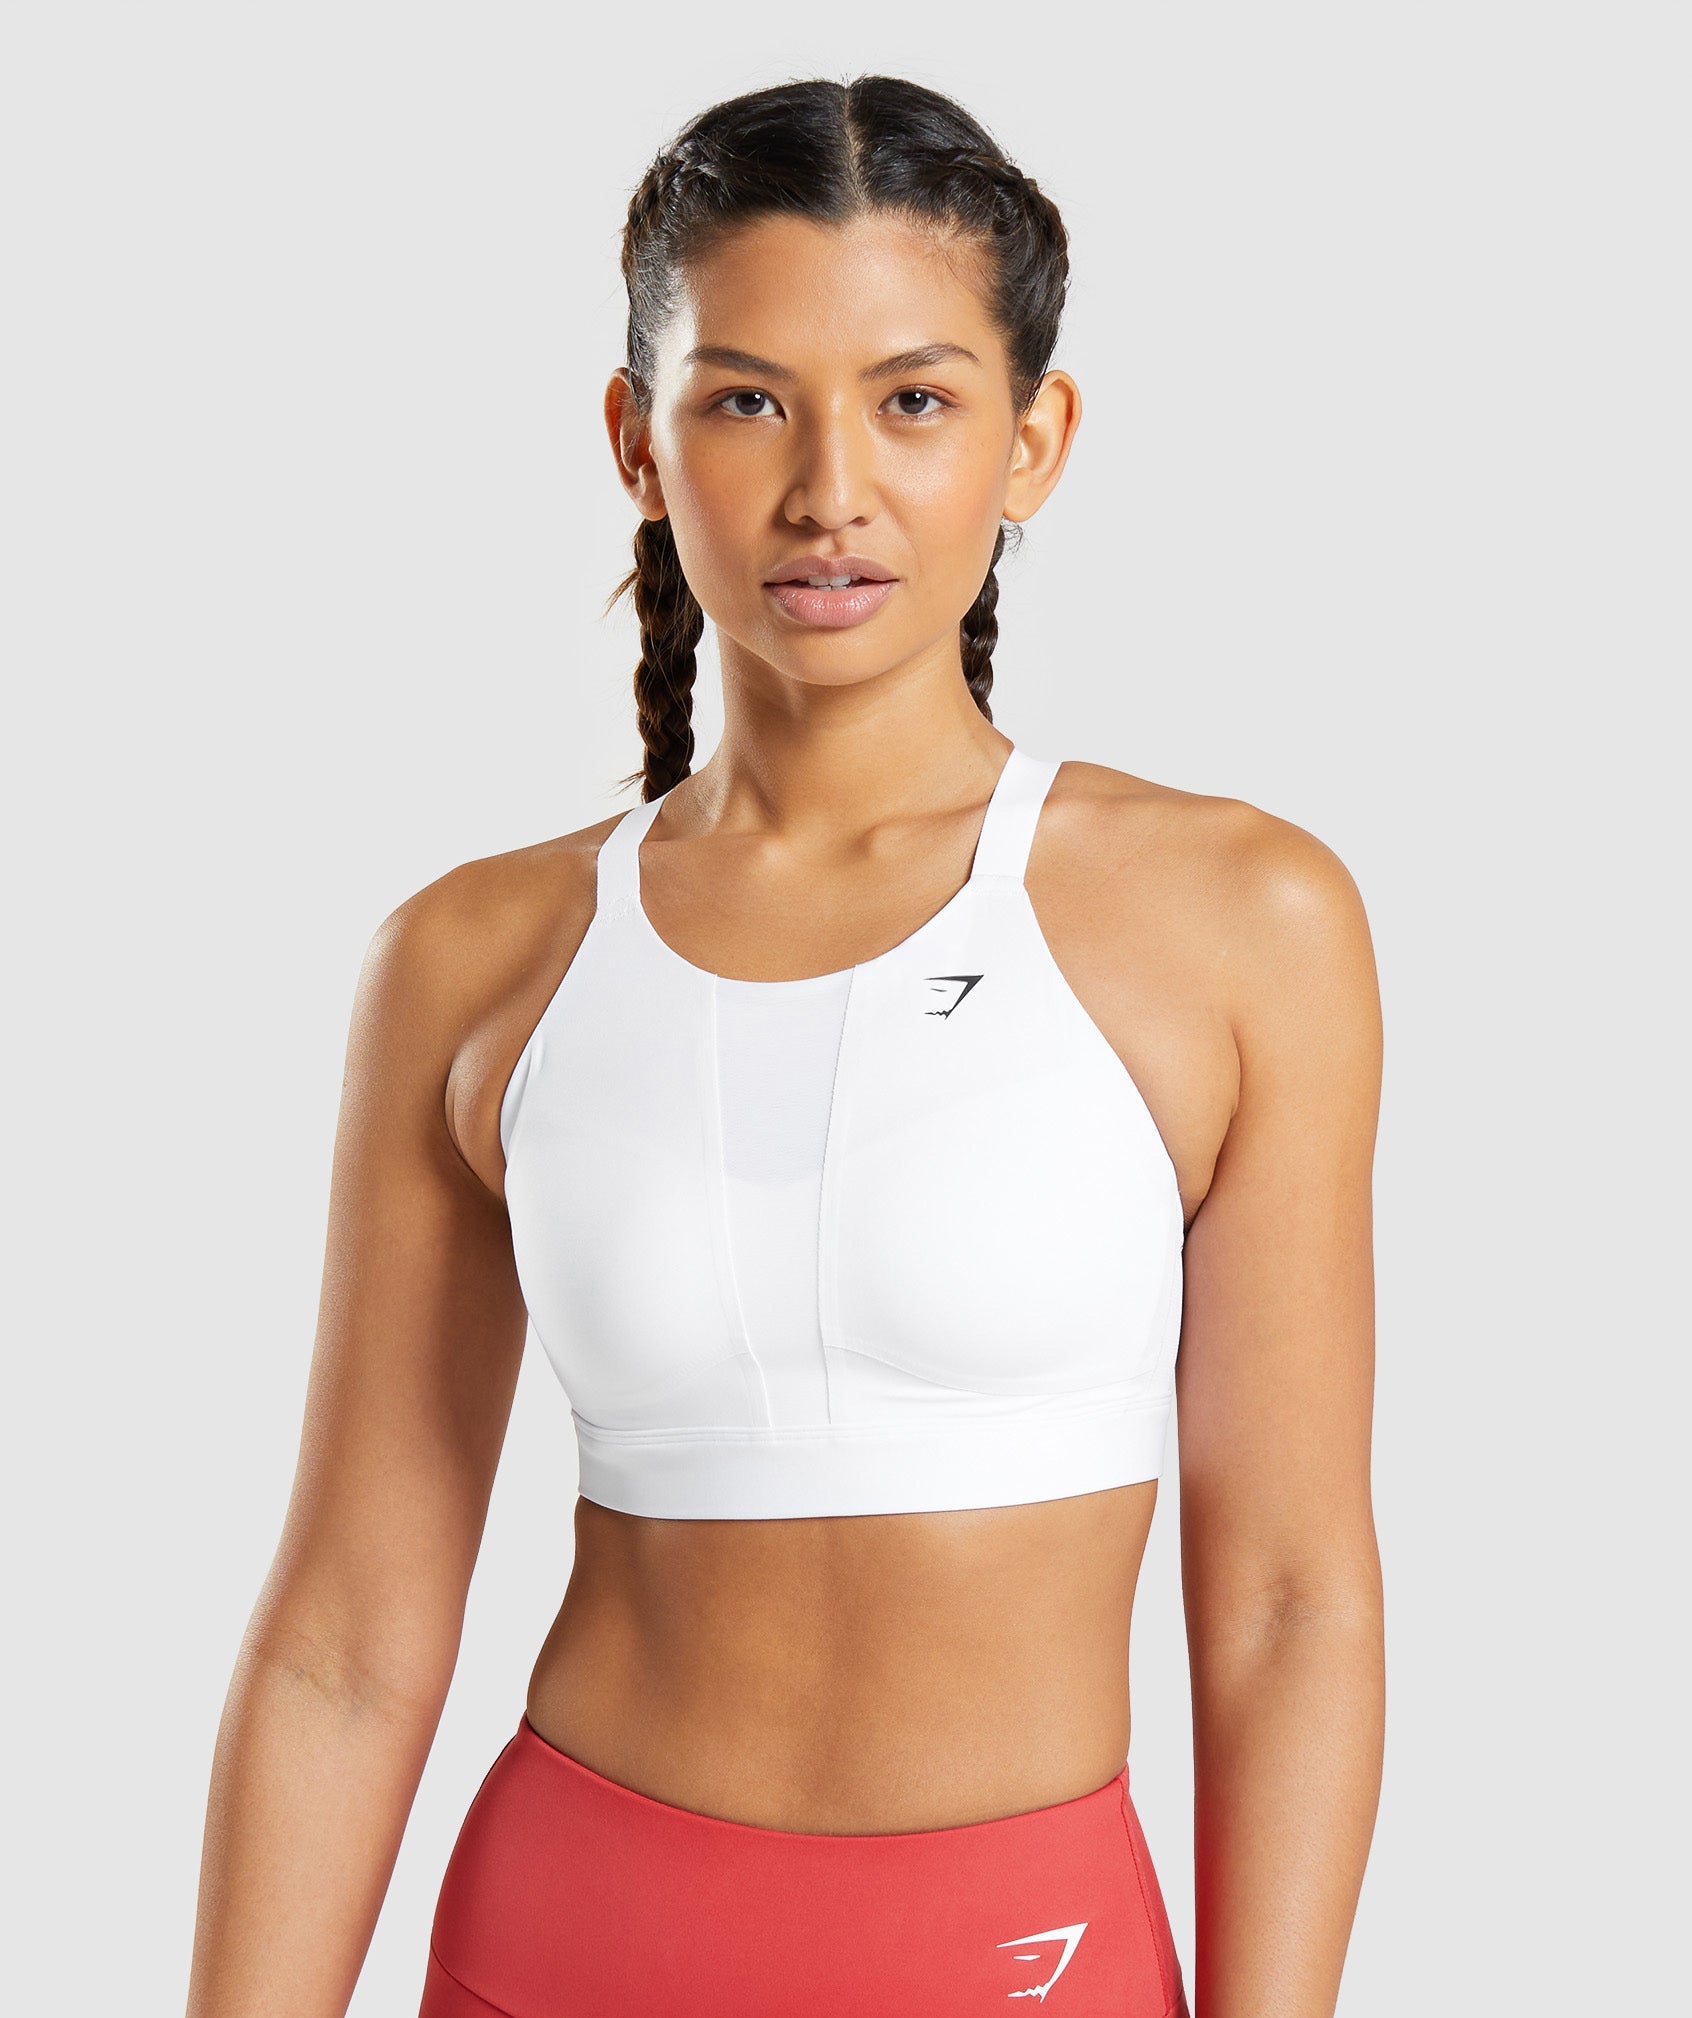 ZYIA ACTIVE White Scalloped Sports Bra Top Gym Fitness Workout Lift M